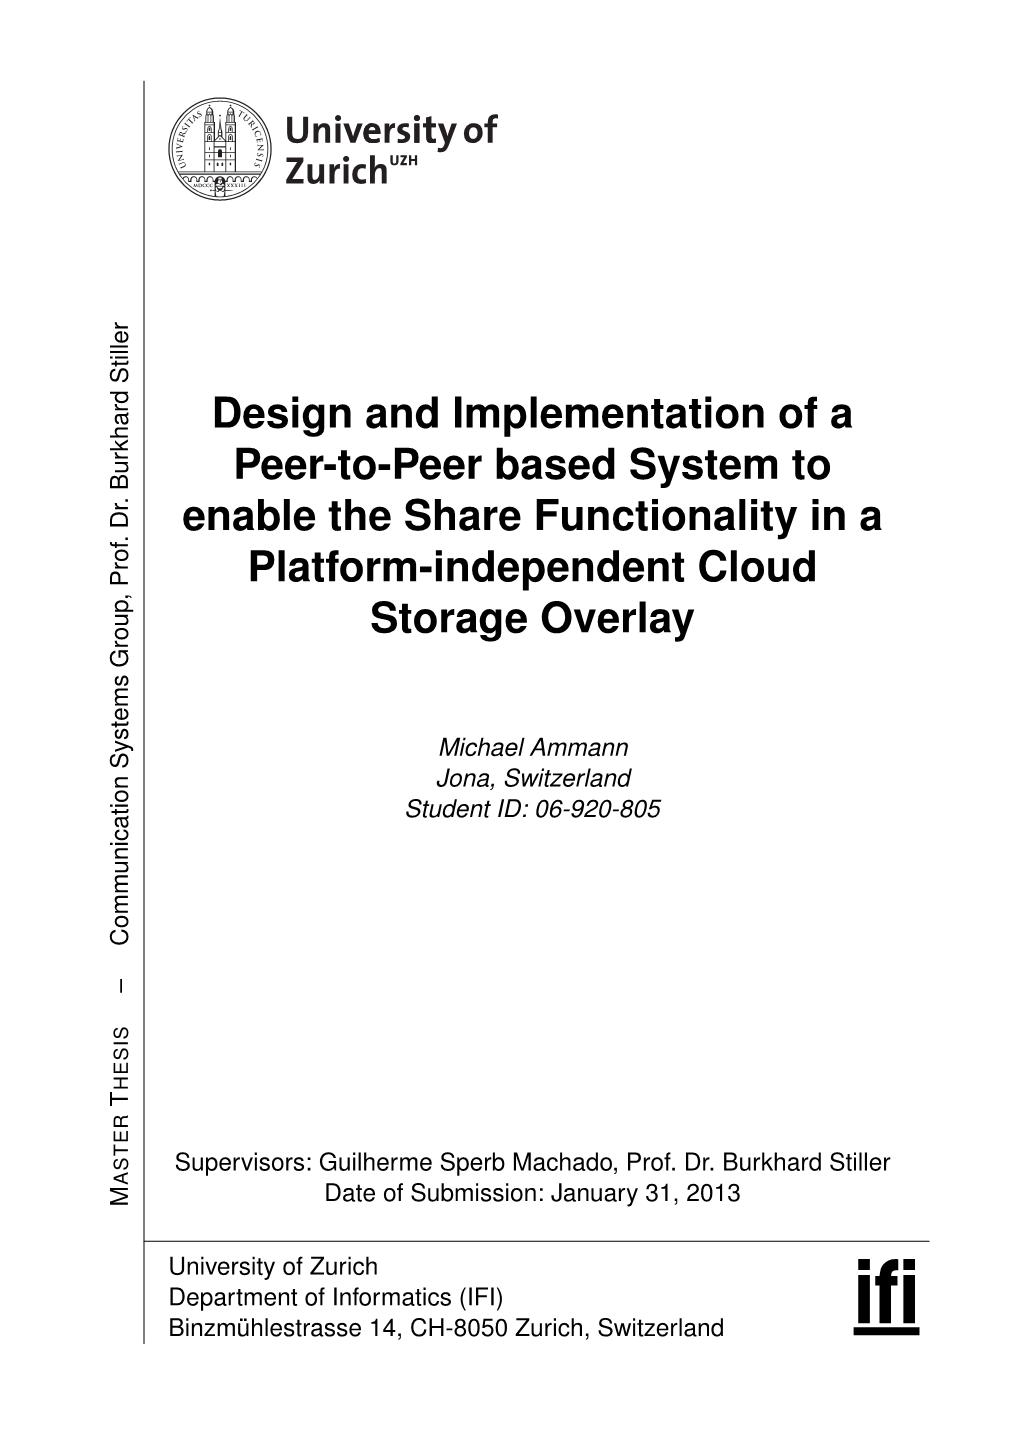 Design and Implementation of a Peer-To-Peer Based System to Enable the Share Functionality in a Platform-Independent Cloud Storage Overlay